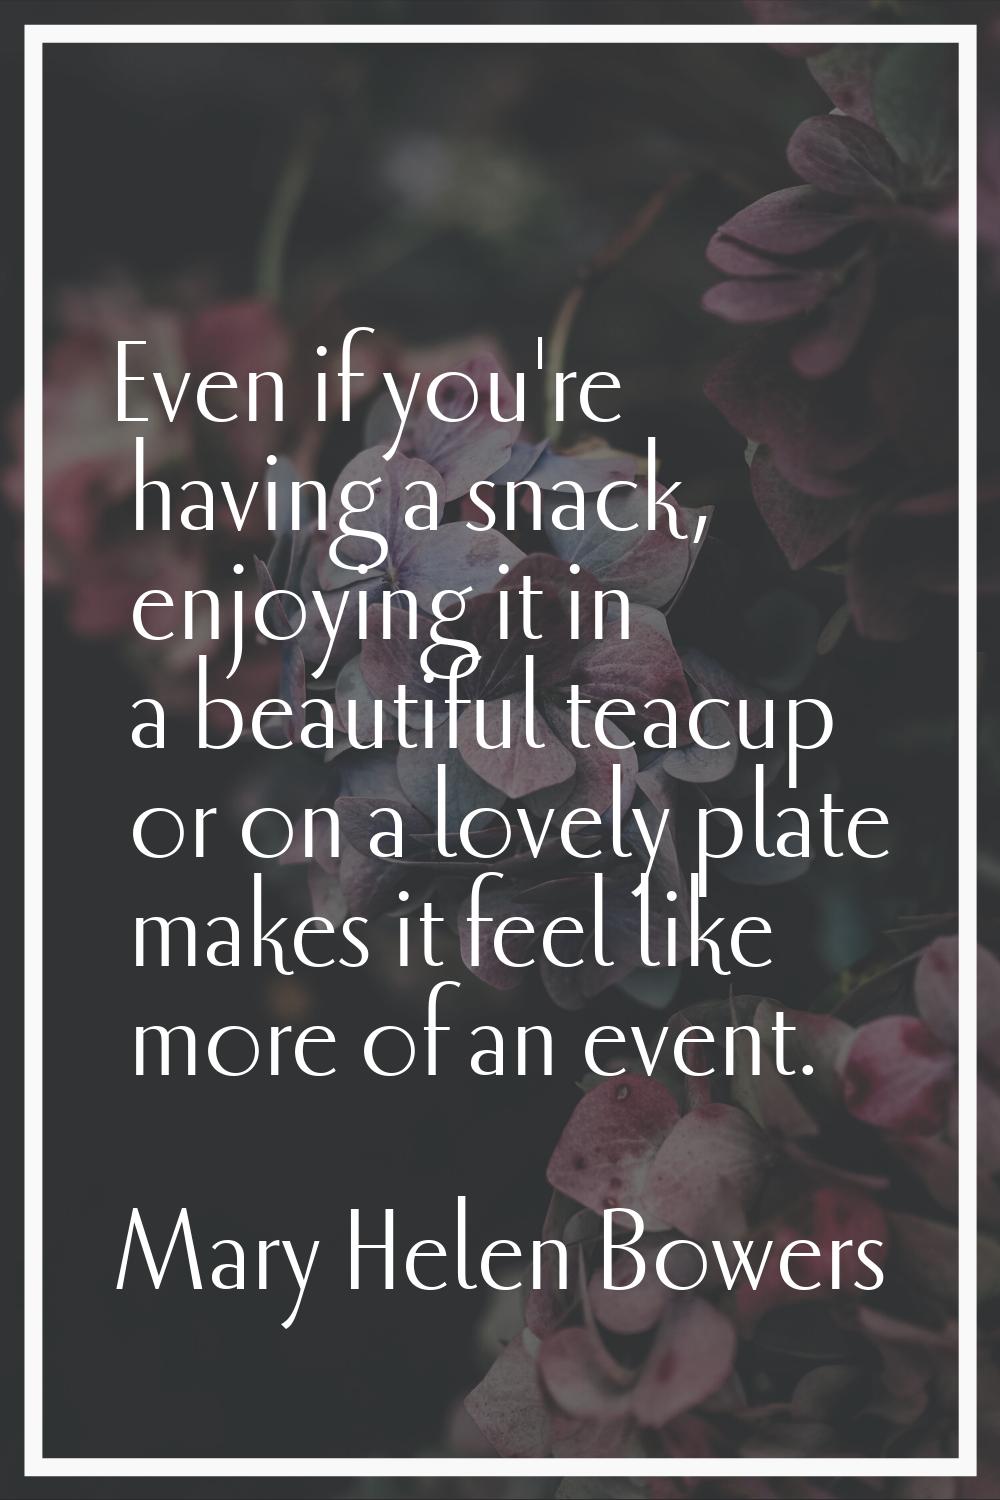 Even if you're having a snack, enjoying it in a beautiful teacup or on a lovely plate makes it feel